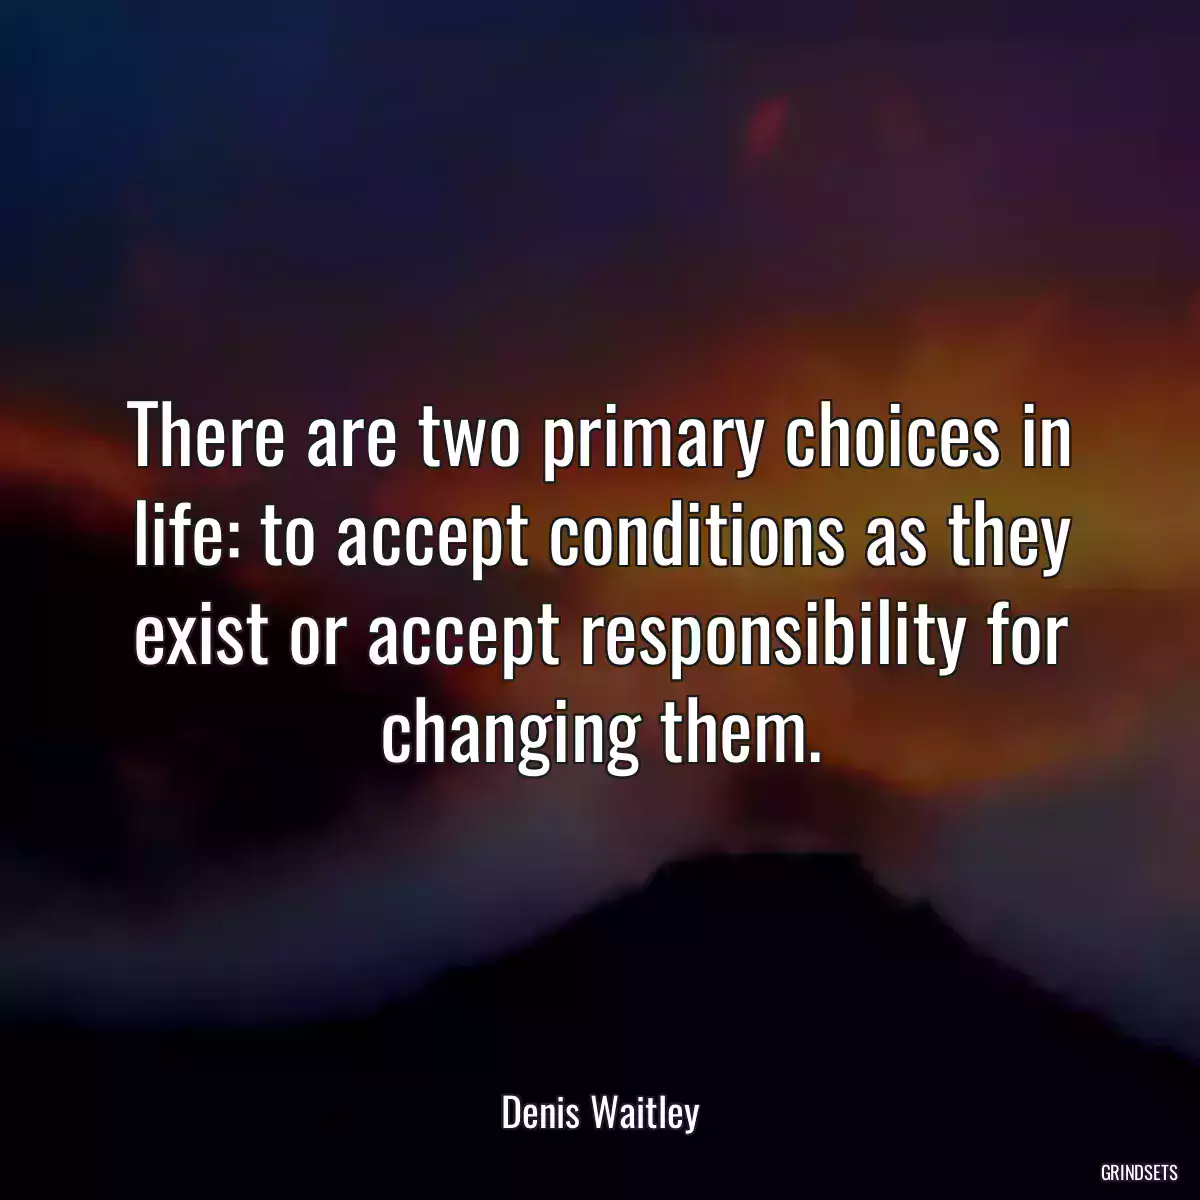 There are two primary choices in life: to accept conditions as they exist or accept responsibility for changing them.